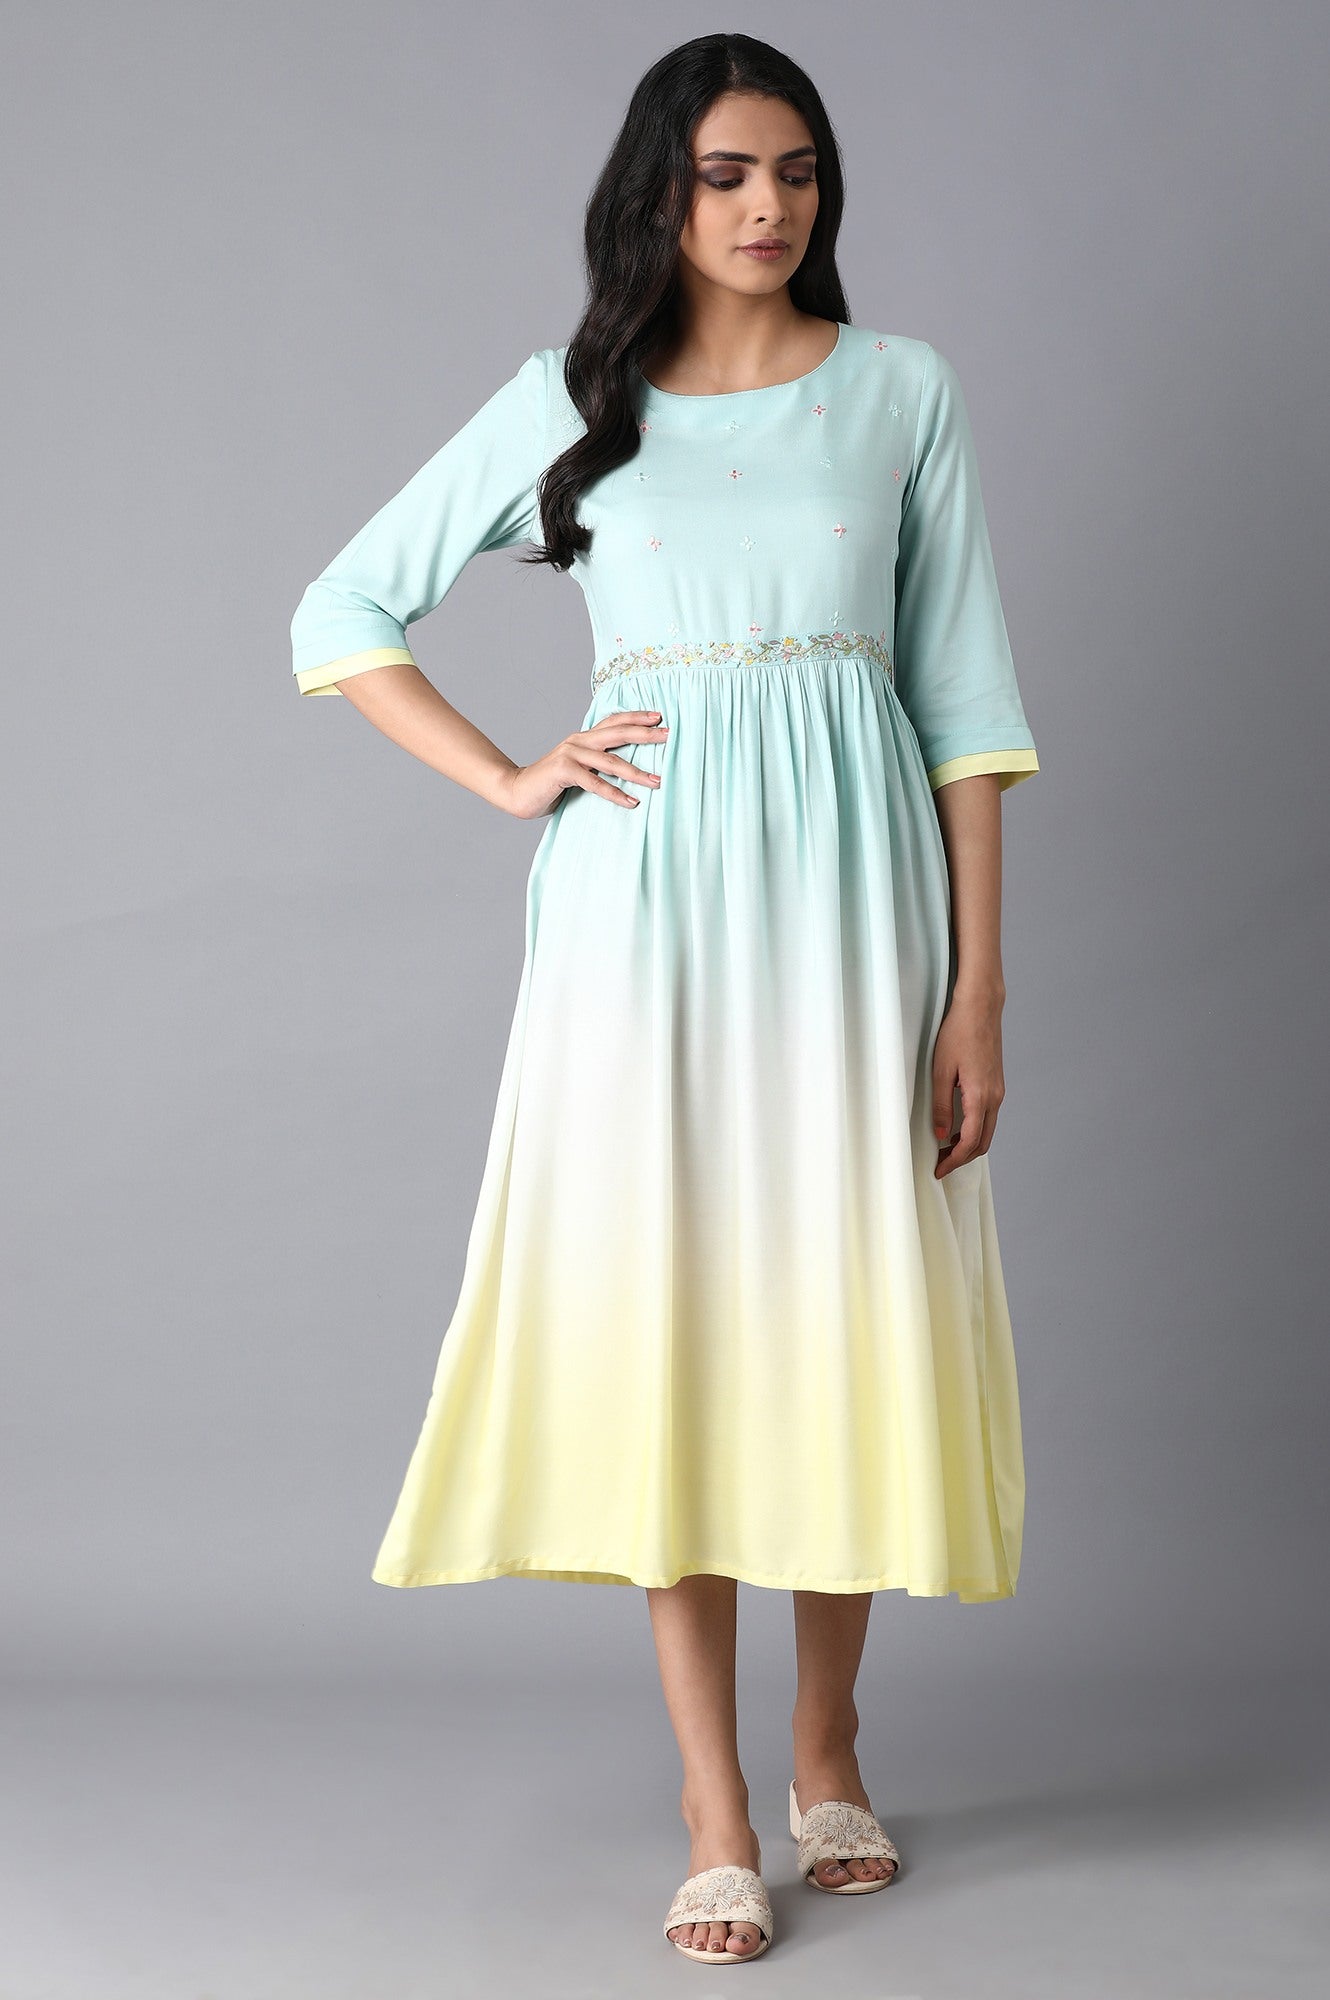 Blue To Yellow Ombre Dress